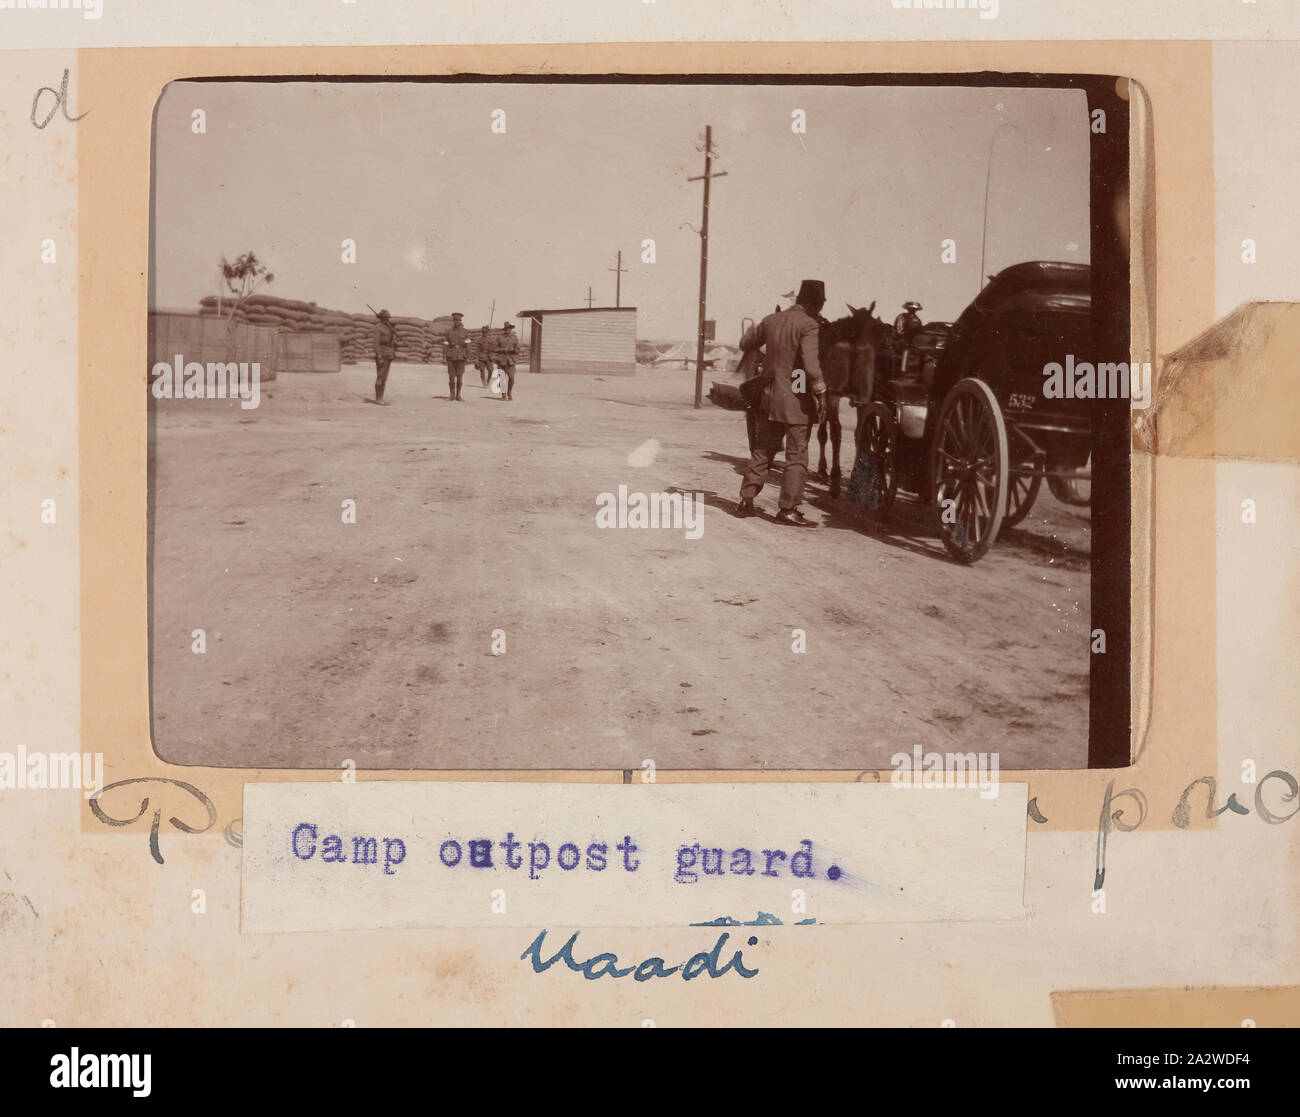 Photograph - 'Camp Outpost Guard', Maadi, Egypt, Trooper G.S. Millar, World War I, 1914-1915, One of 49 photographs in an album from World War I likely to have been taken by Troop (later Lieutenant) G.S. Millar depicting the Light Horse camp in Egypt, 1915, prior to Gallipoli. This image shows the outpost guard around the Australian Light Horse Camp at el-Ma'adi (Meadi). El-Ma'adi (Meadi) Camp was one of three training camps in Egypt that were used by the A.I.F. and the N.Z.E.F Stock Photo